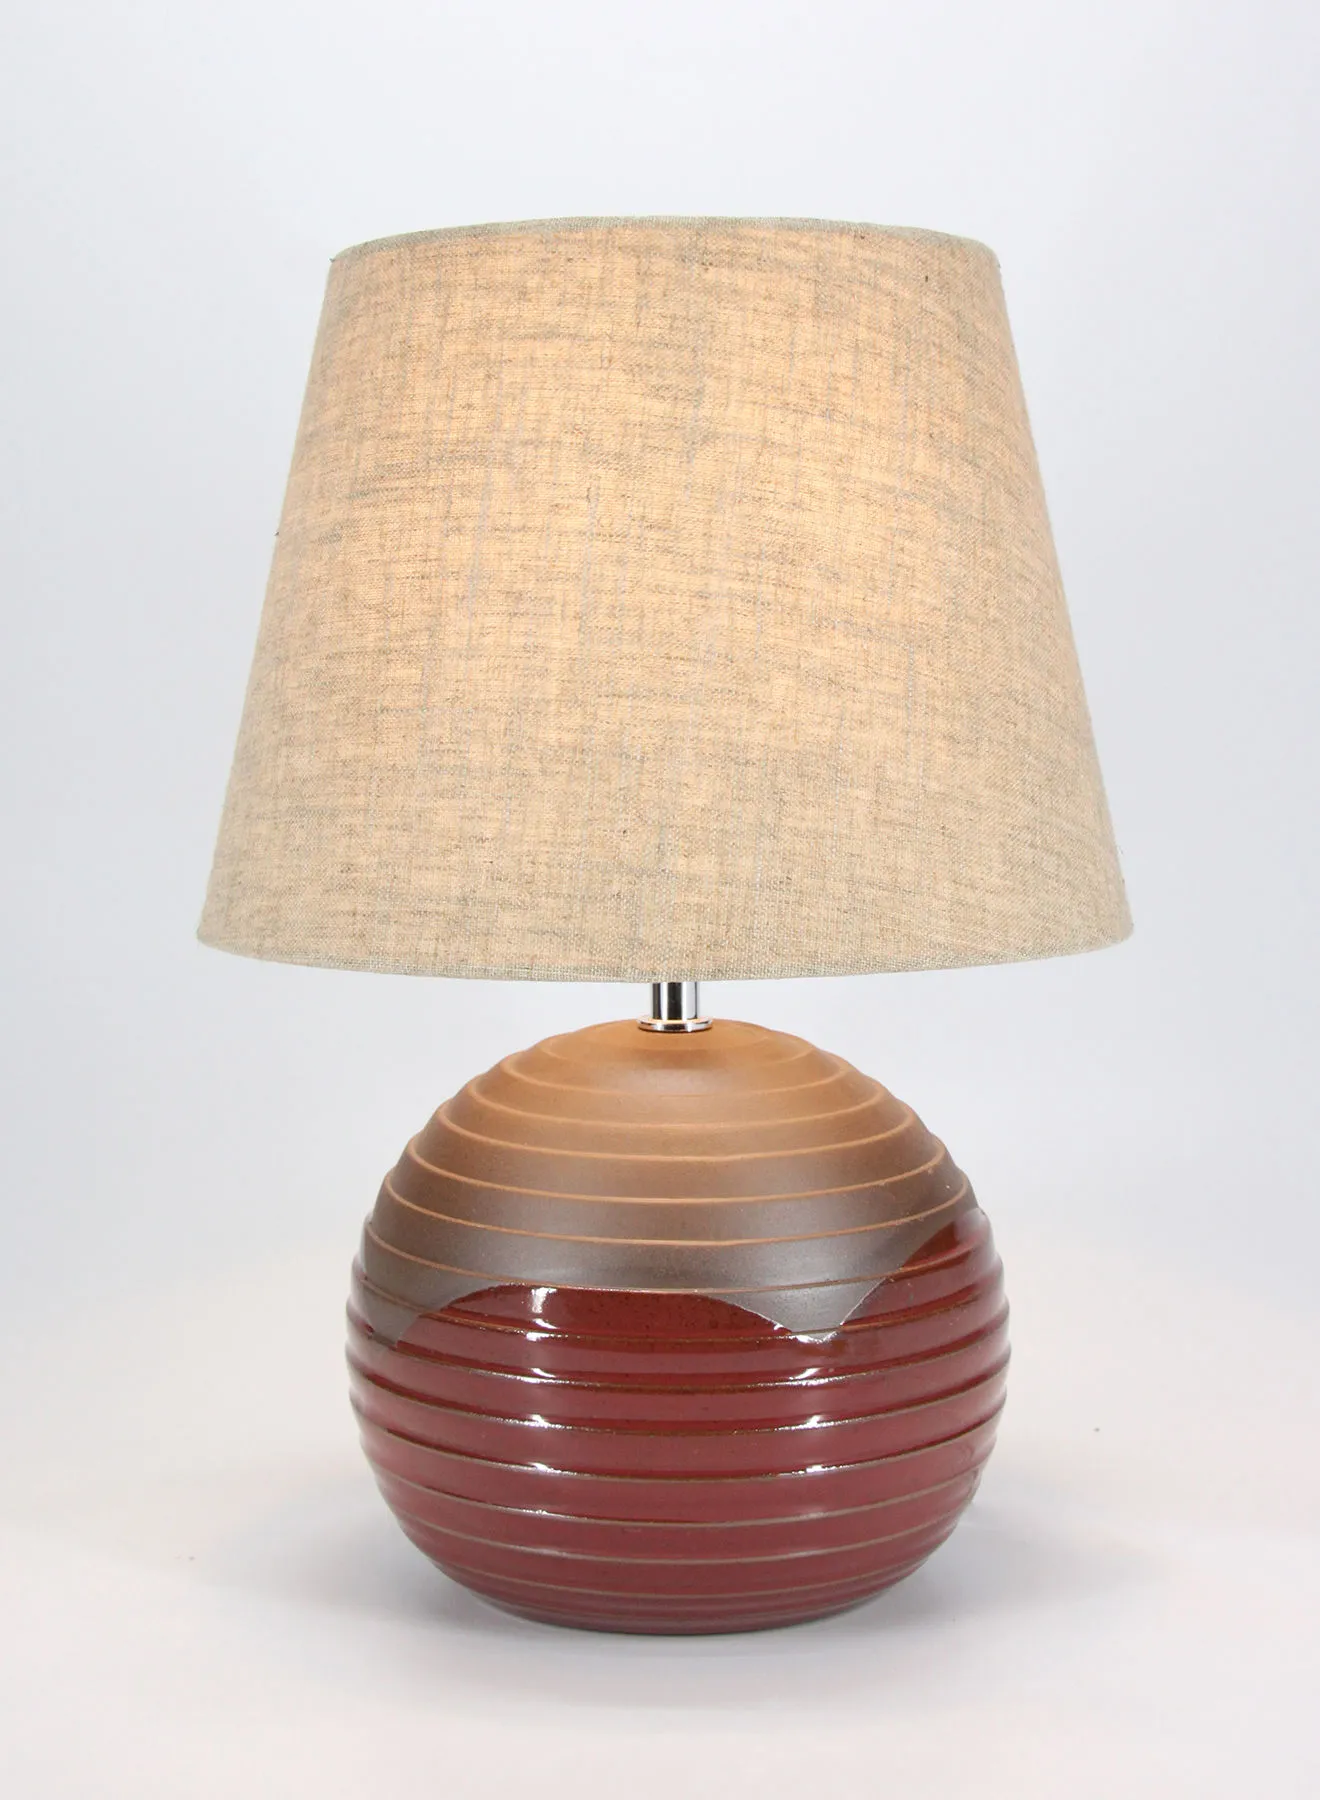 ebb & flow Seve Ceramic Table Lamp | Lampshade Unique Luxury Quality Material for the Perfect Stylish Home D181-121 Red 30 x 30 x 42.2